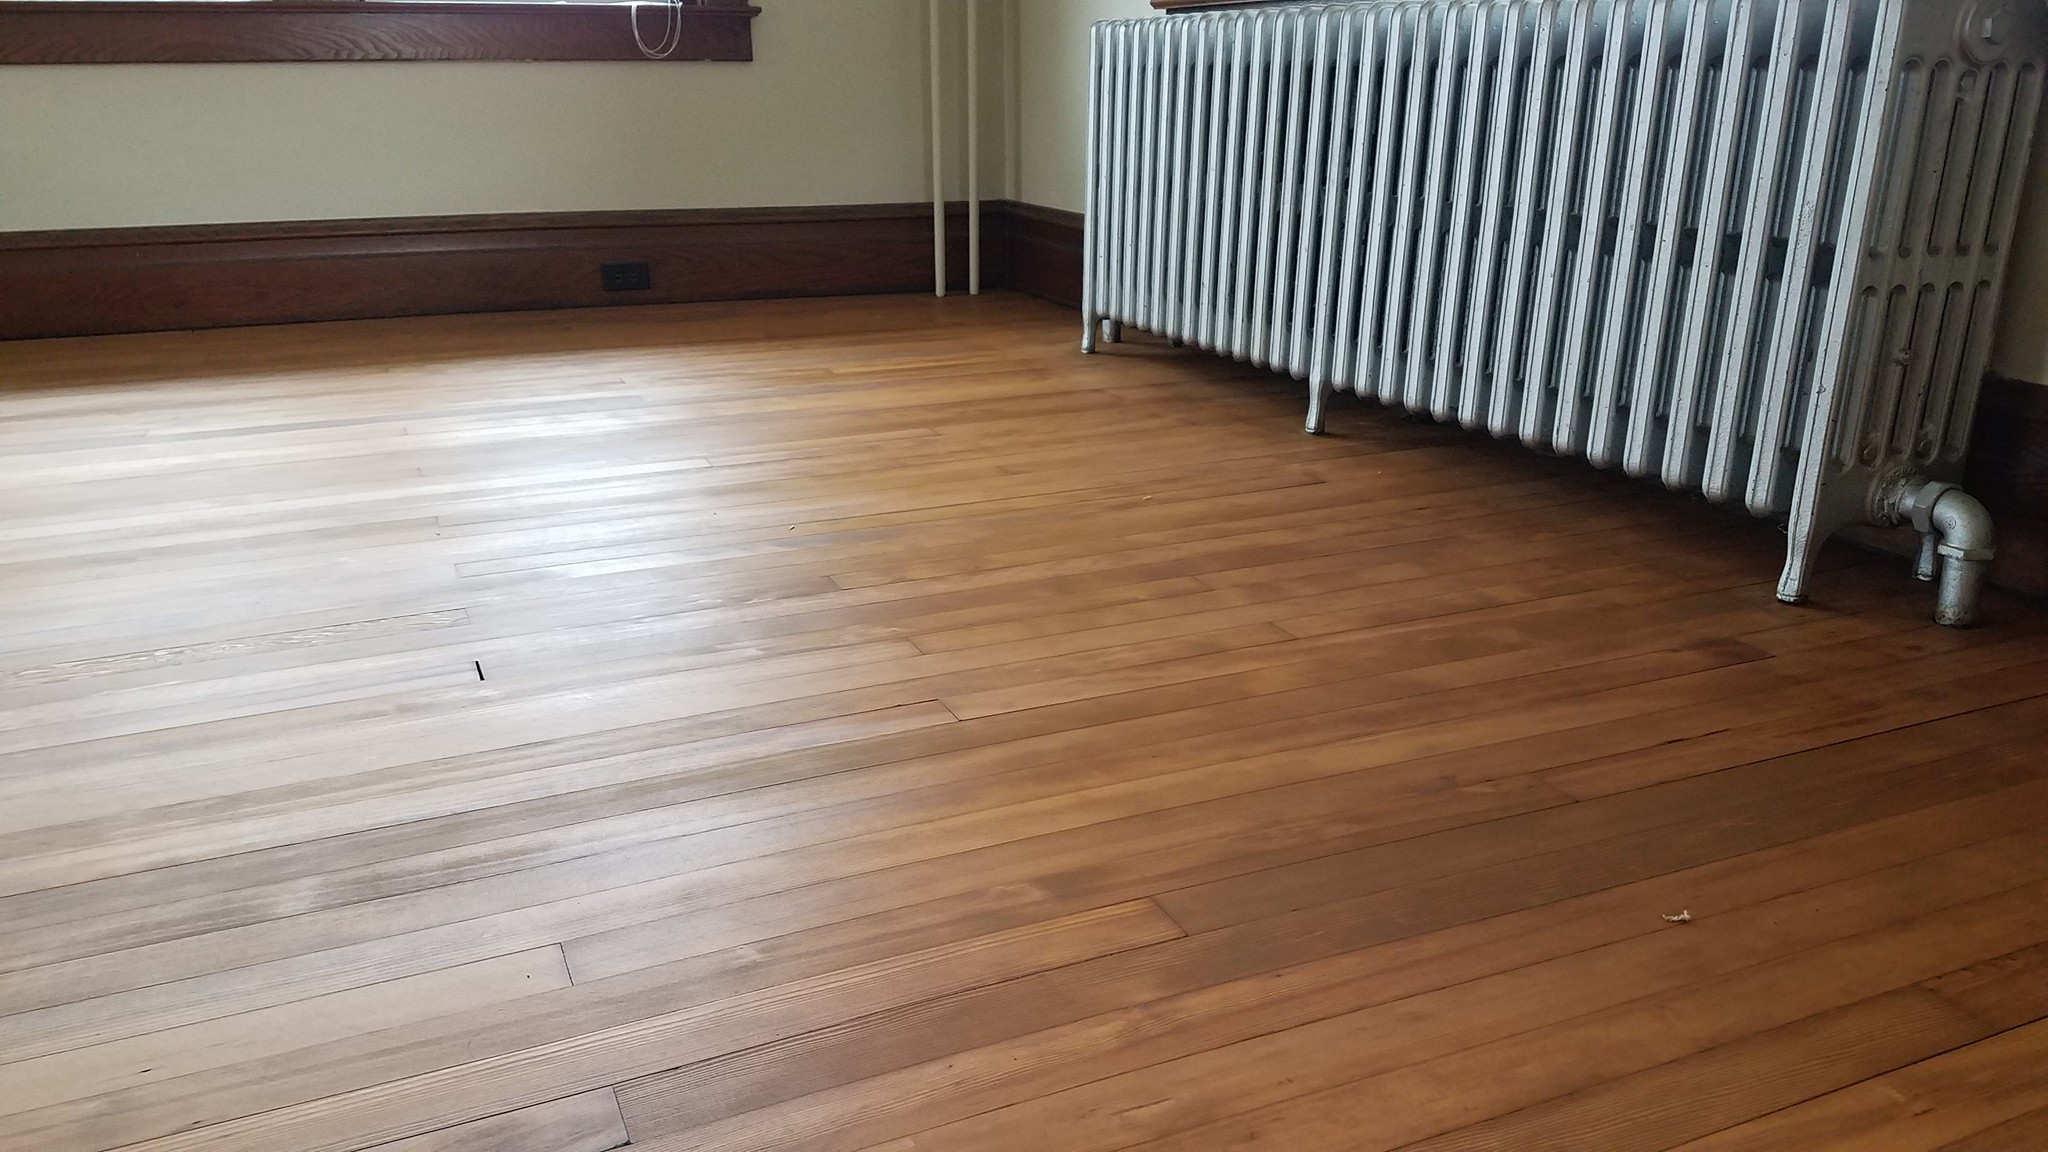 16 Lovely Price for Sanding and Refinishing Hardwood Floors 2022 free download price for sanding and refinishing hardwood floors of vintage wood flooring for 18192487 1622452841115889 4874100895389868825 o